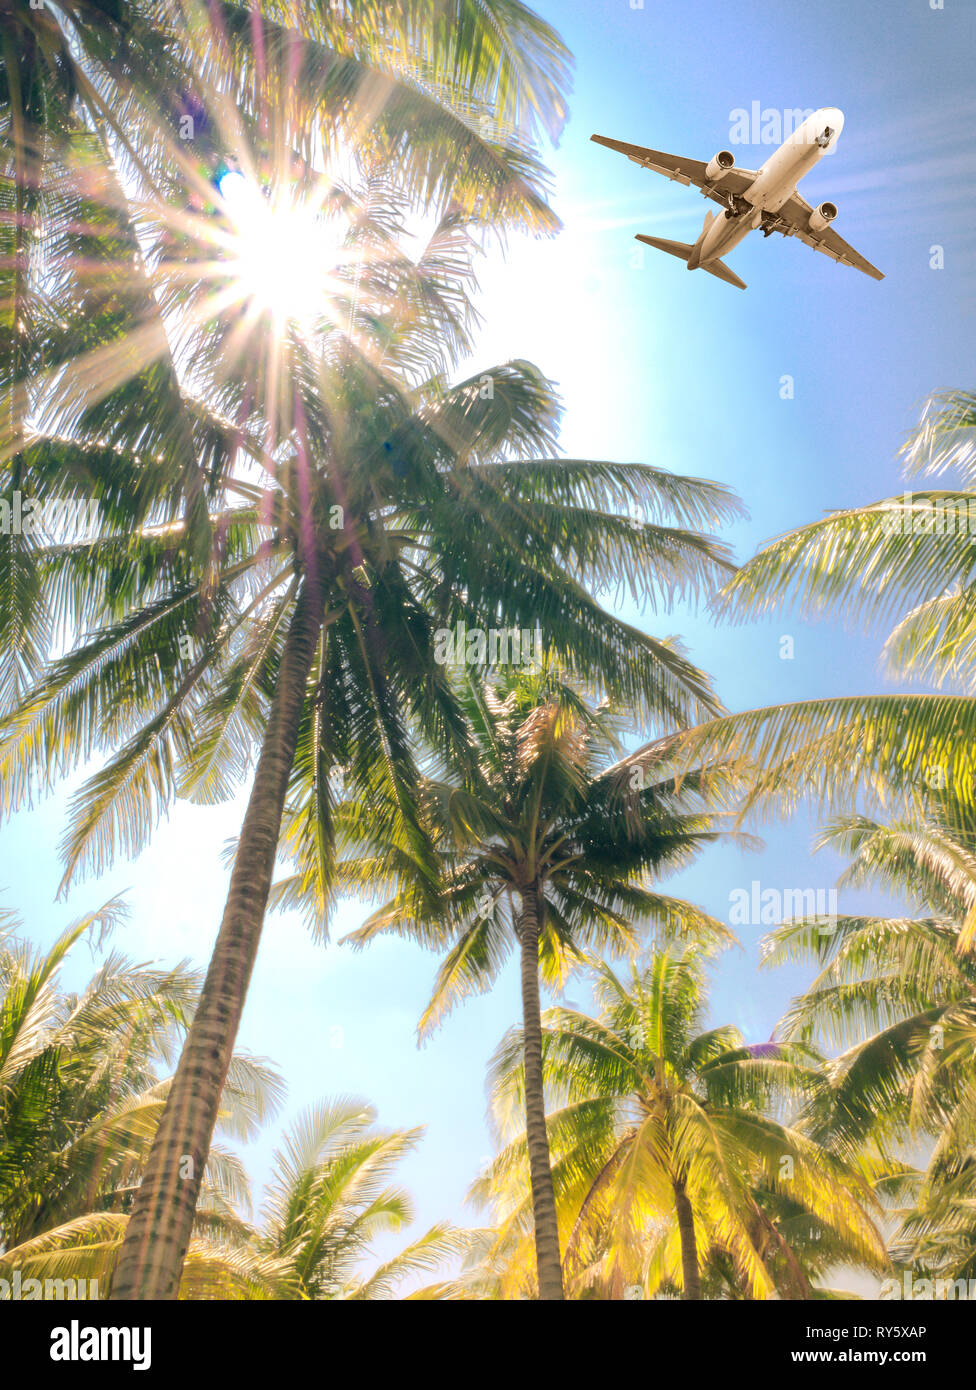 Airplane and Vintage tone style coconut tree on the beach Stock Photo